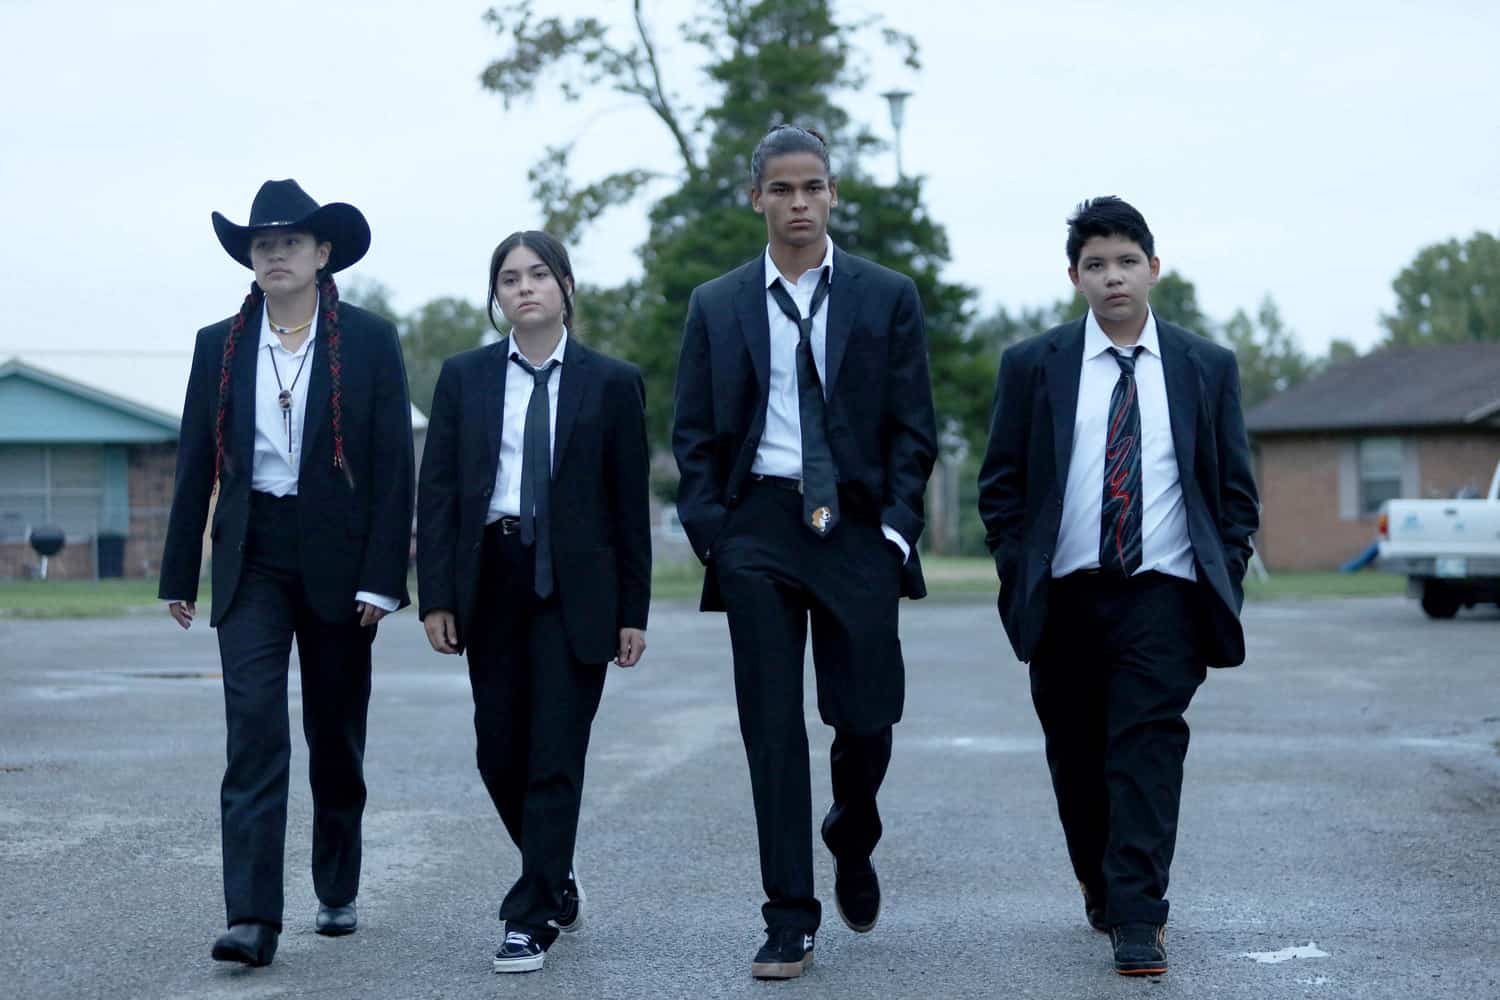 Four teens walk side by side in this image from FX Productions